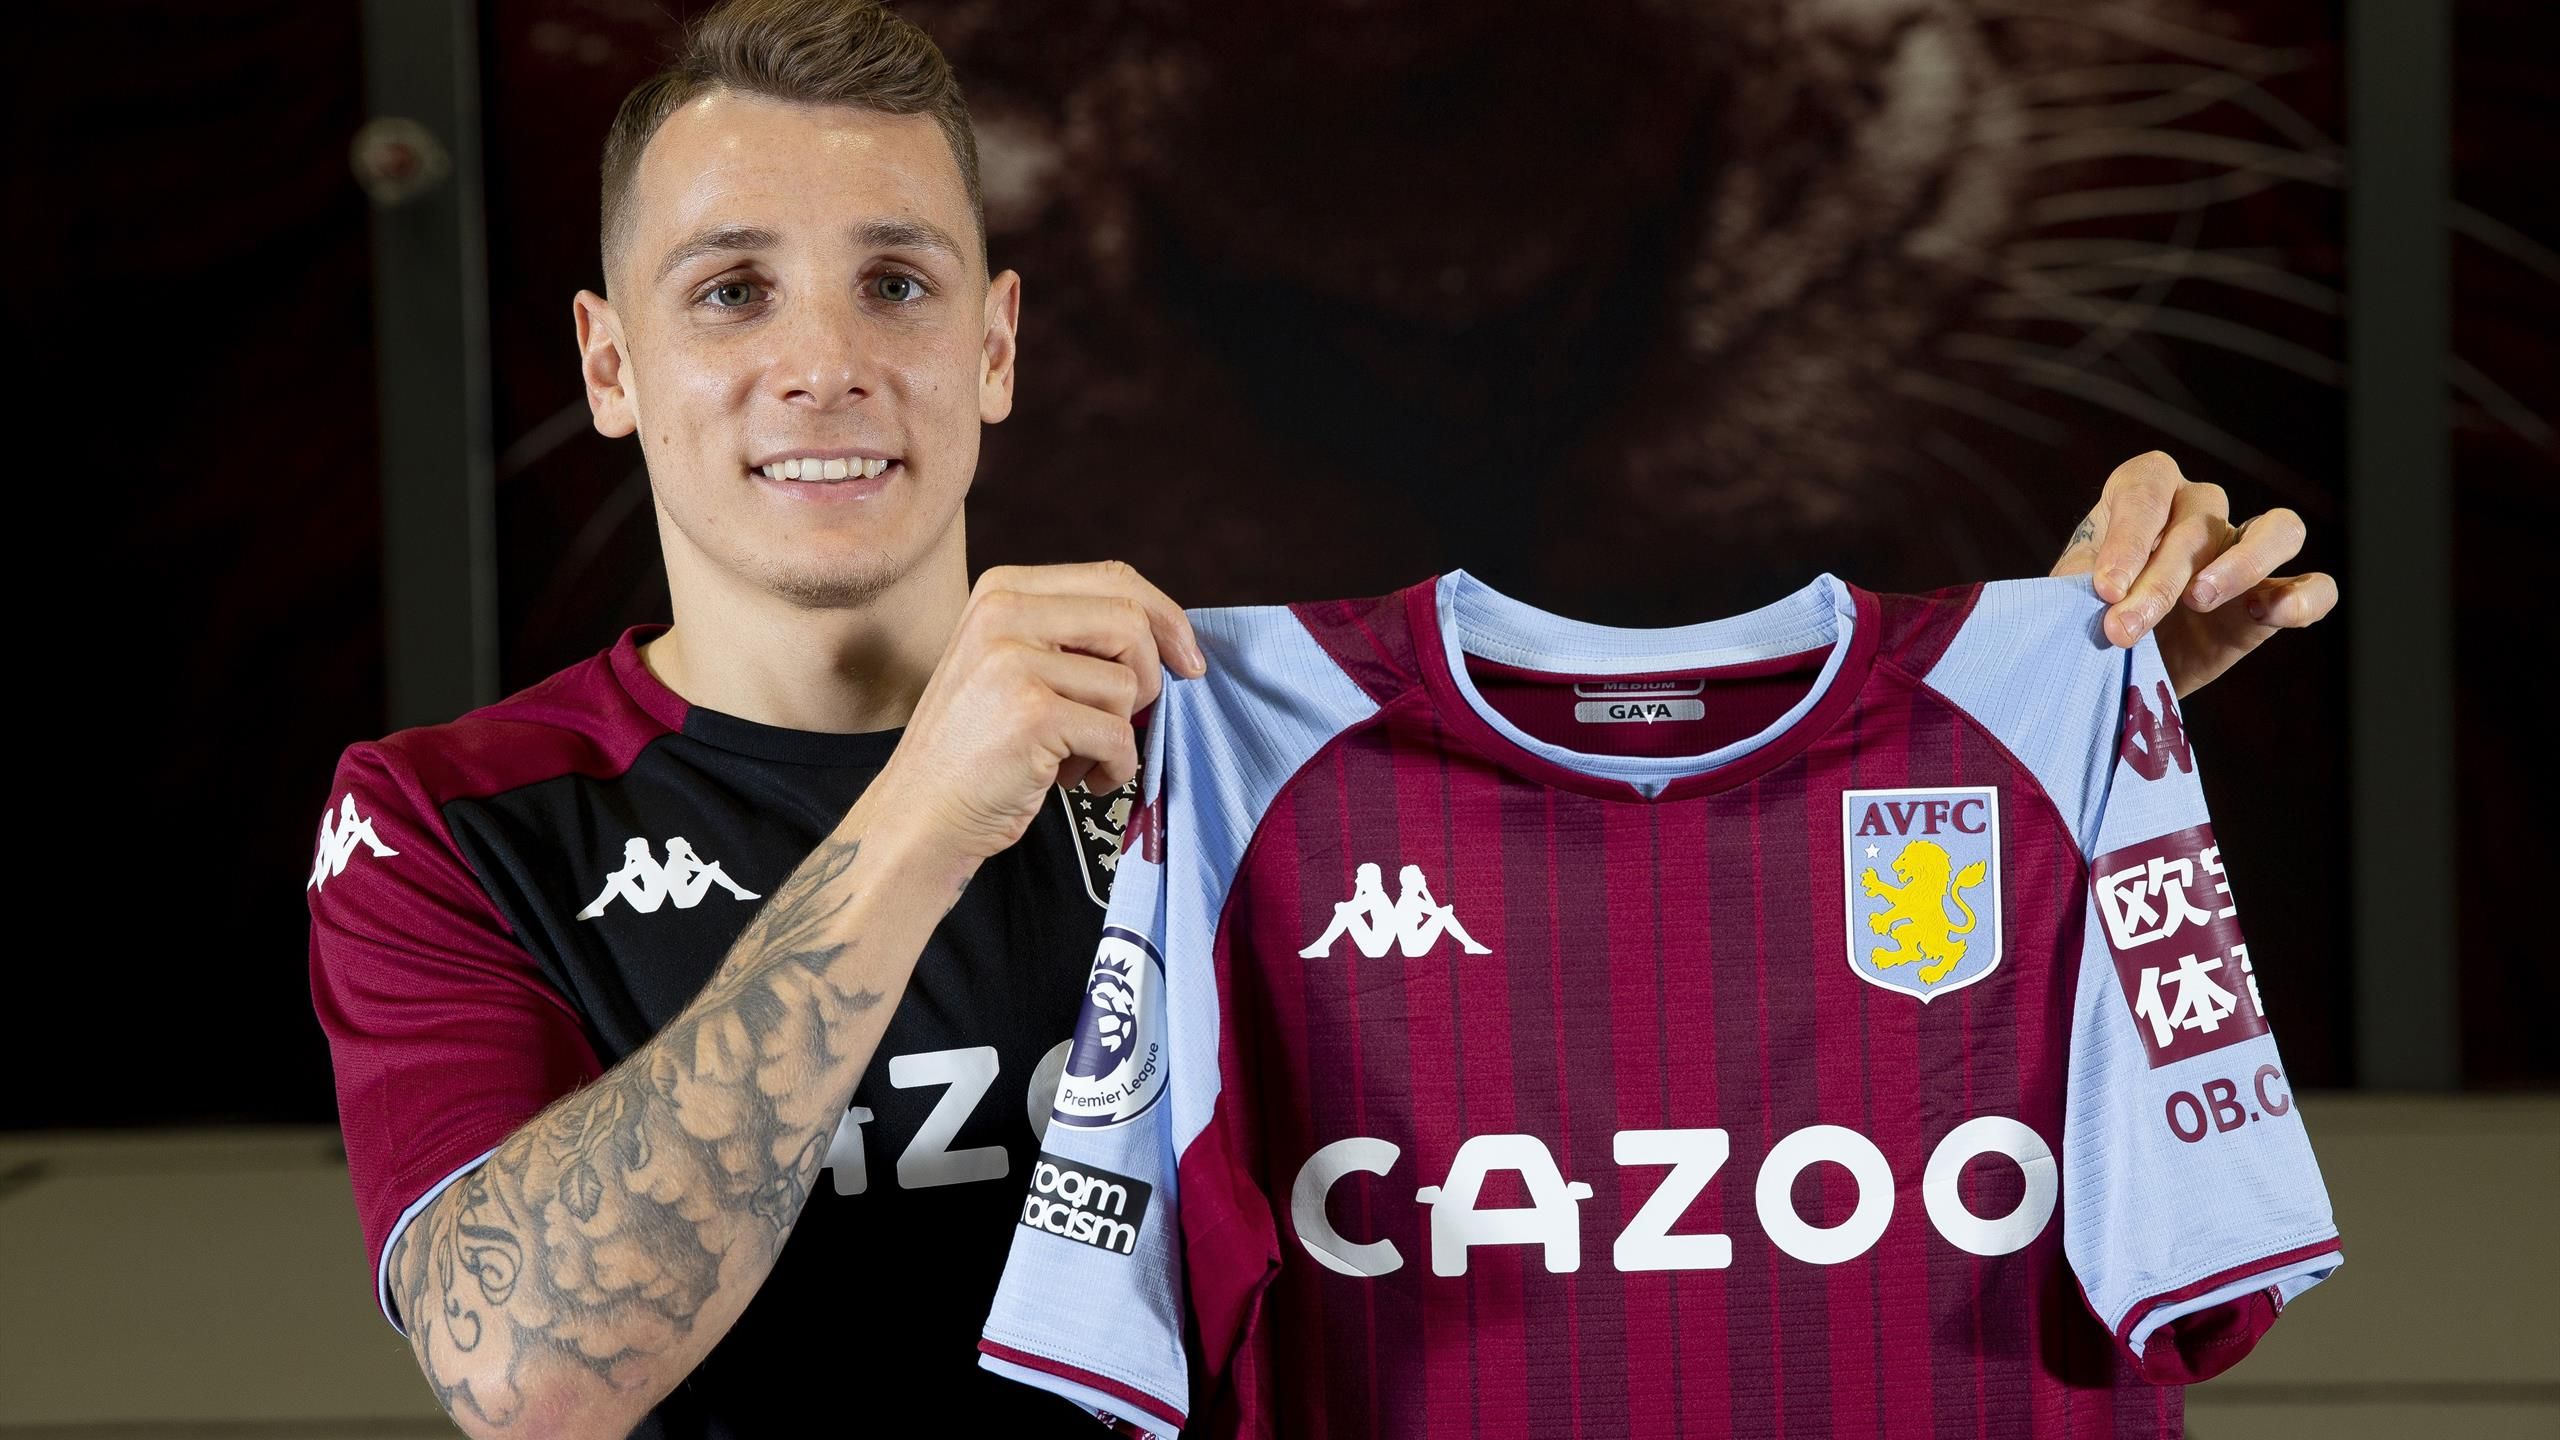 Lucas Digne joins Aston Villa in £25 million deal from Everton after Philippe Coutinho signing